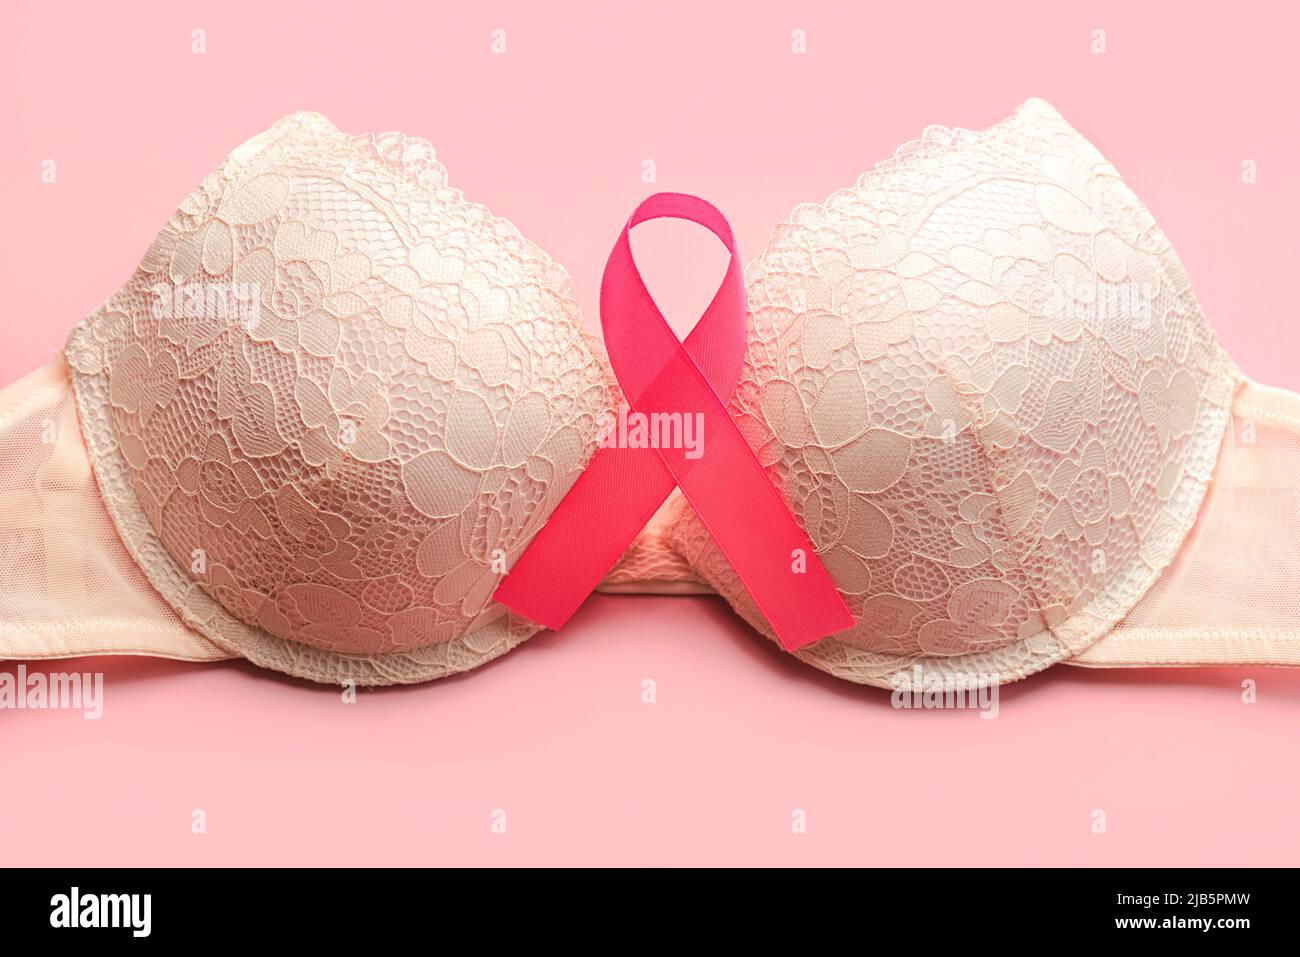 Breast cancer concept. Top view of Women's bra and pink ribbon symbol breast cancer awareness over pink background Stock Photo